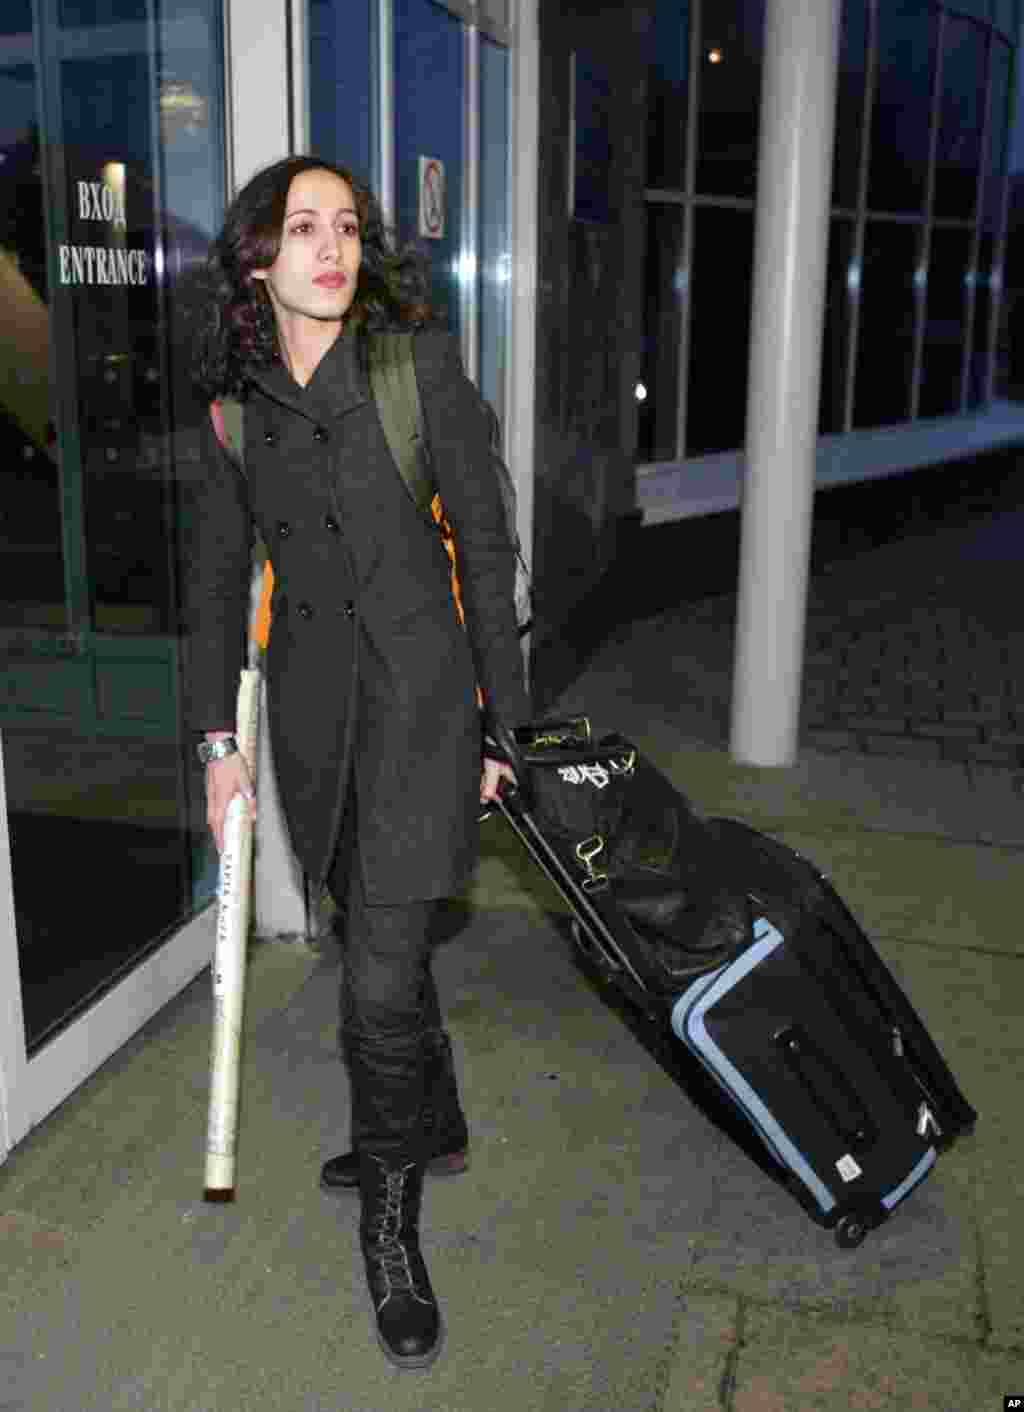 Greenpeace International activist Faiza Oulahsen of the Netherlands arrives at St. Petersburg airport to catch a flight after receiving her exit visa from the Federal Migration Service, St. Petersburg, Russia, Dec. 27, 2013.